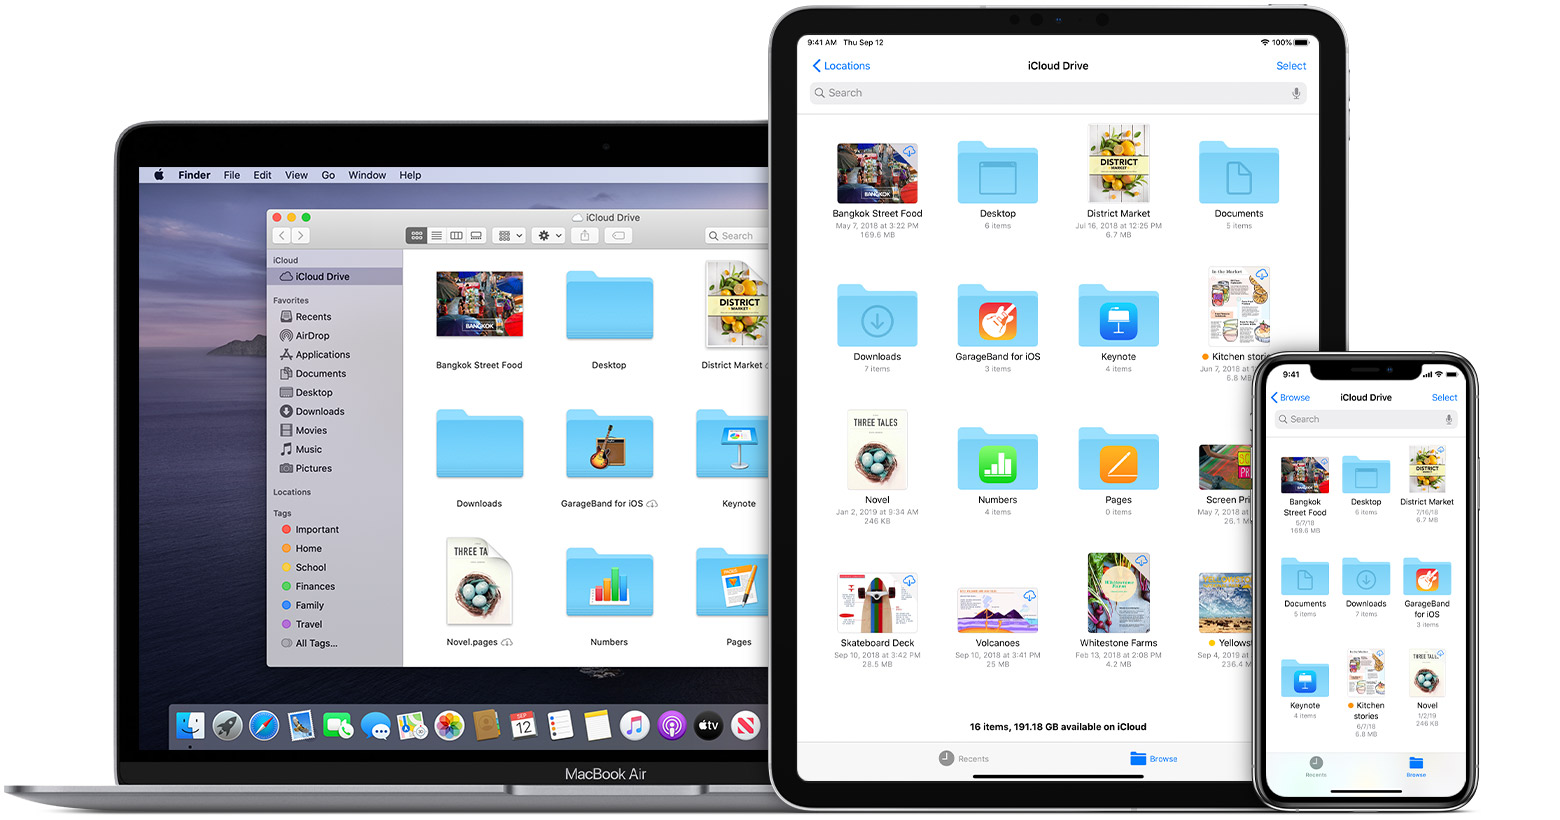 How To Download Pictures From Mac To Ipad